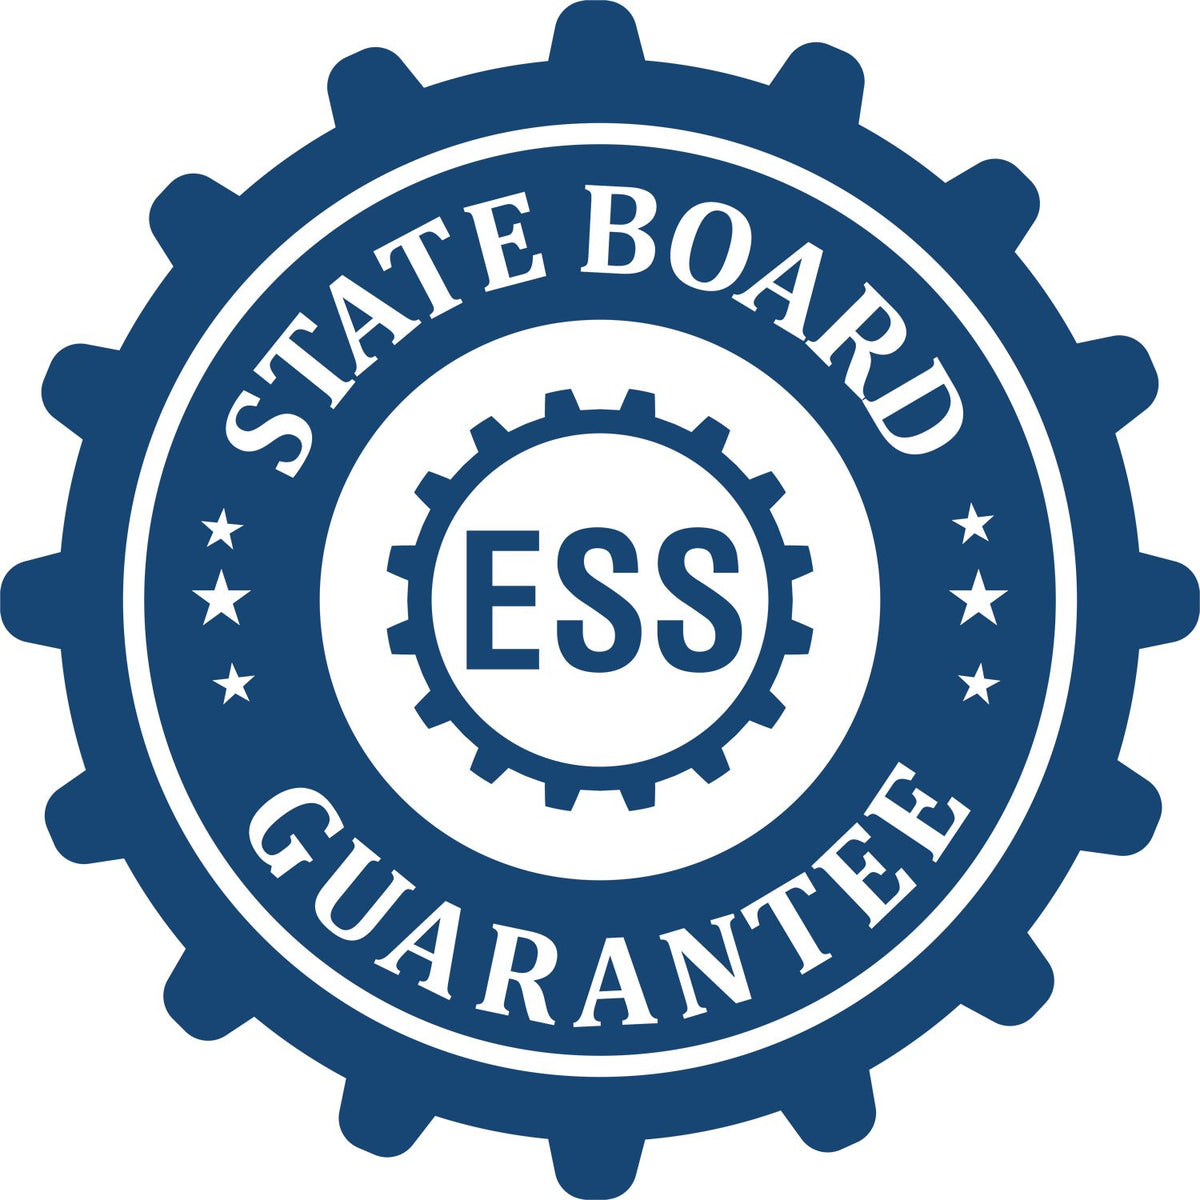 An emblem in a gear shape illustrating a state board guarantee for the Hybrid Virginia Land Surveyor Seal